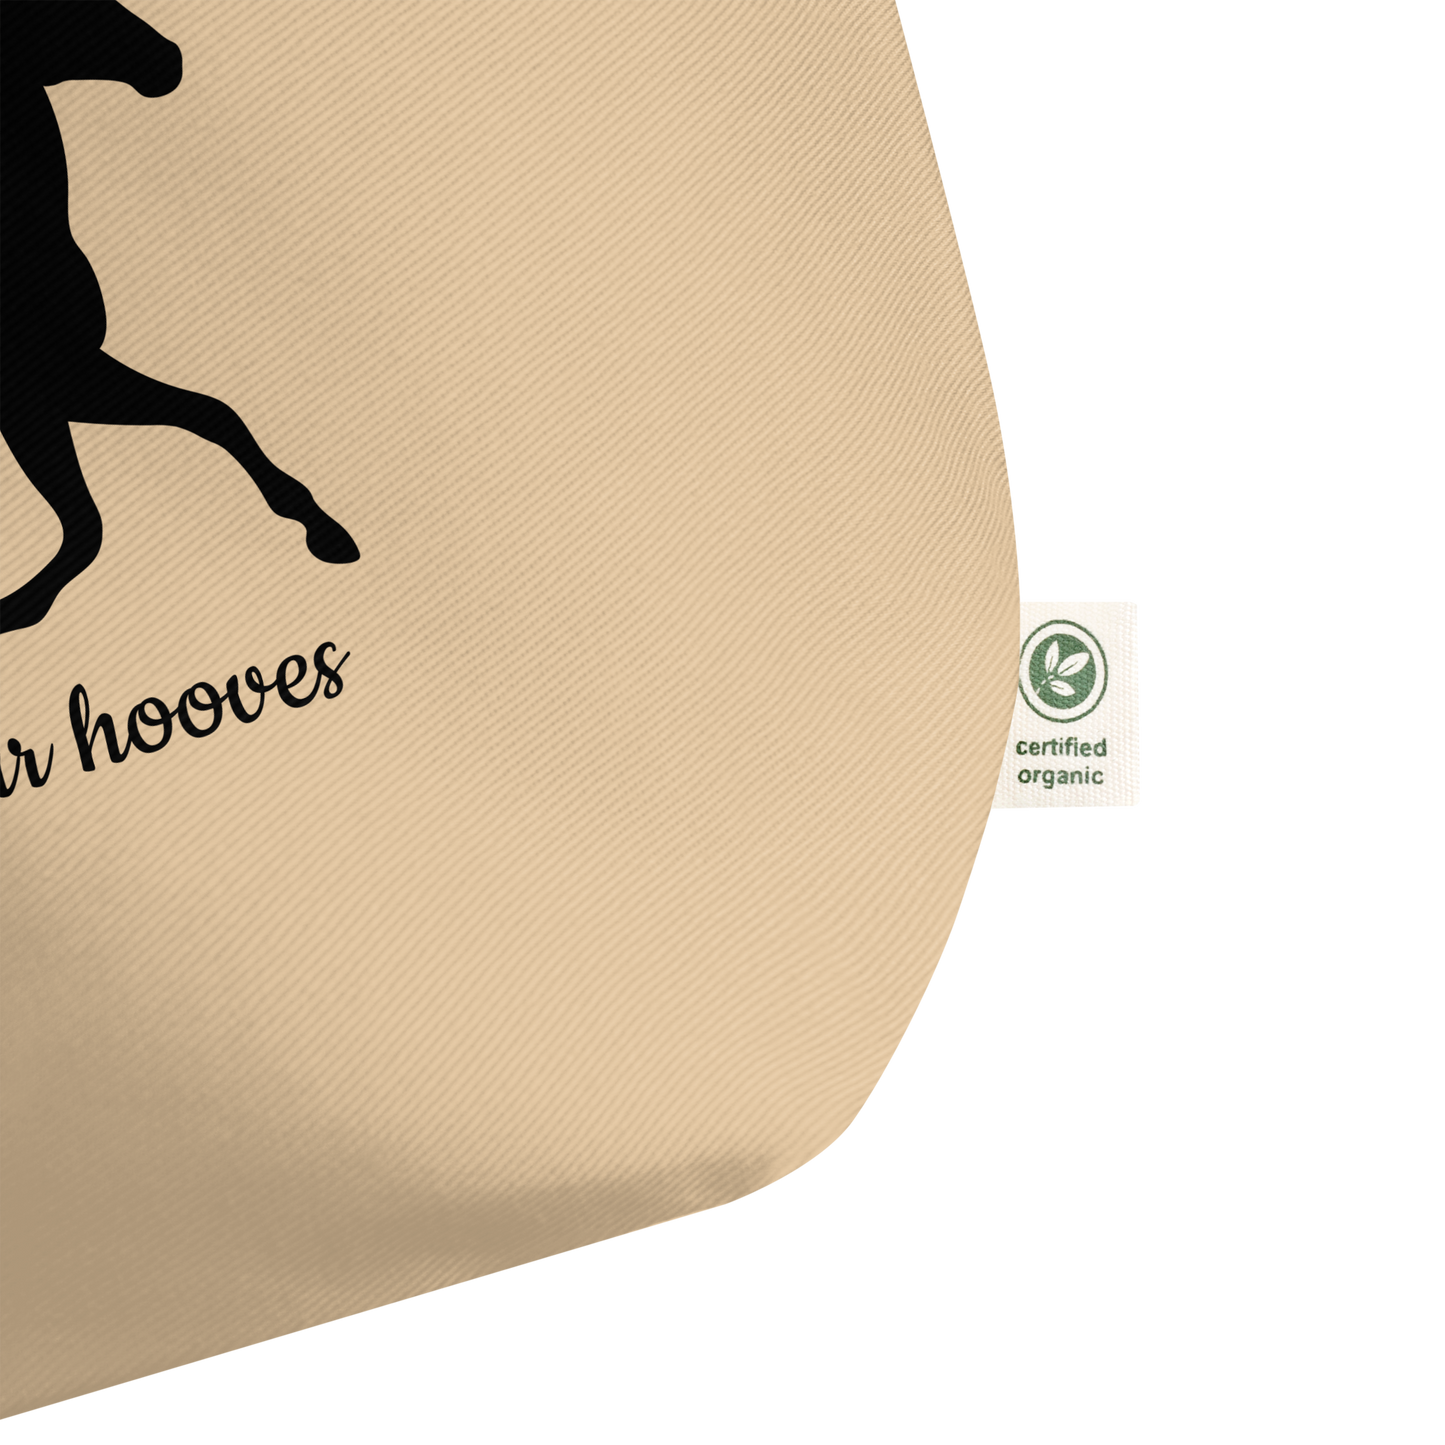 Love has four hooves - Large organic tote bag